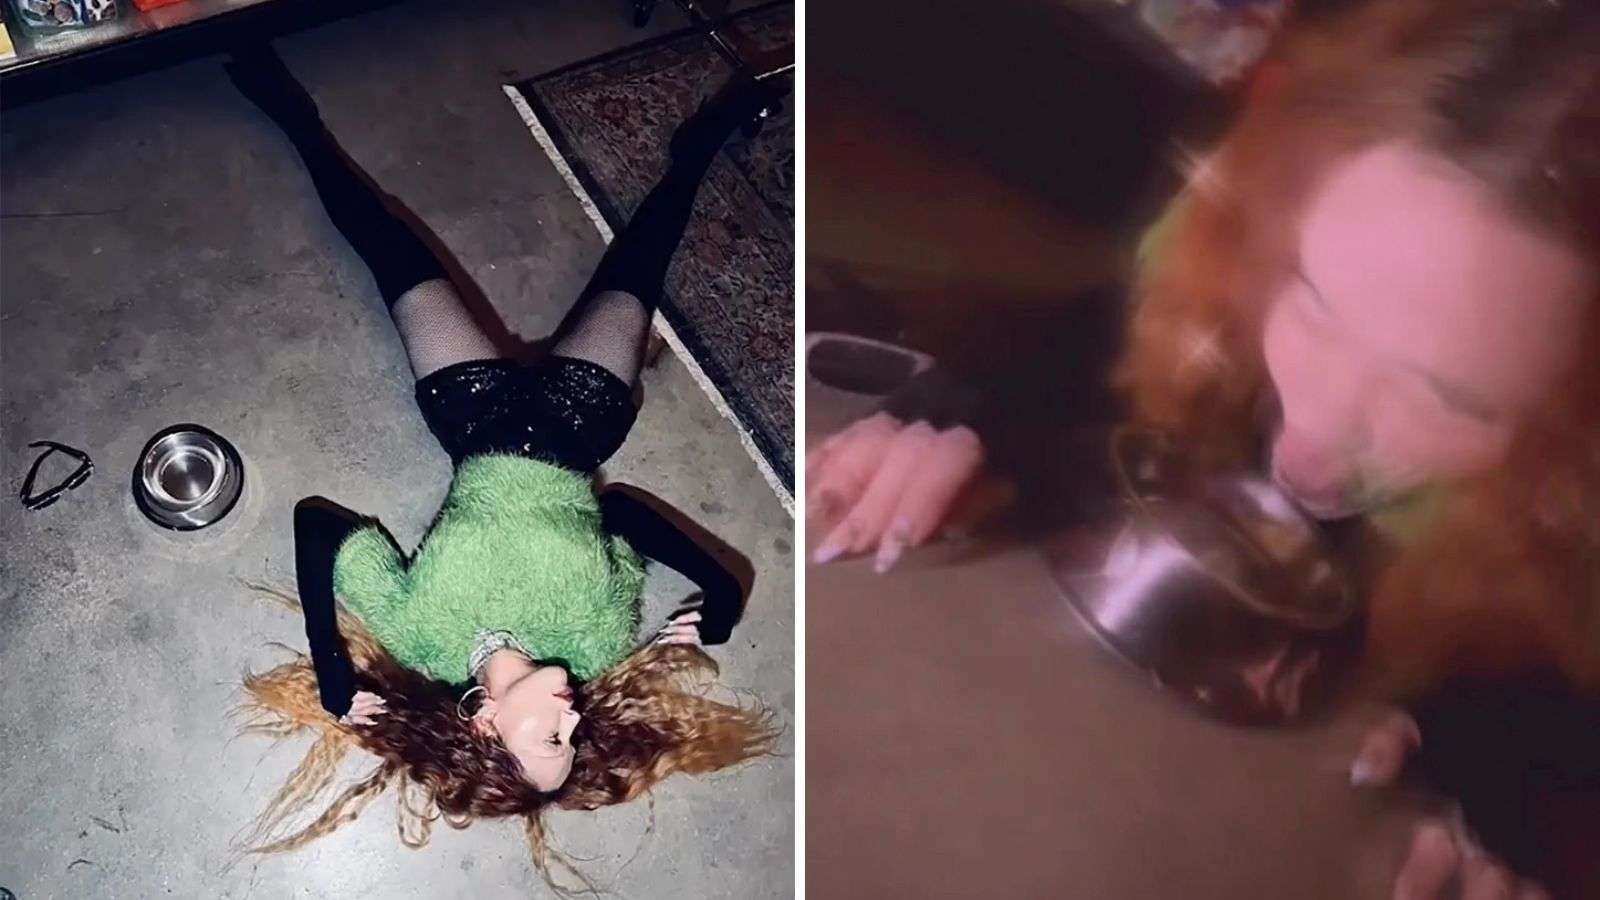 Madonna disgusts fans after drinking water out of dog bowl in viral video